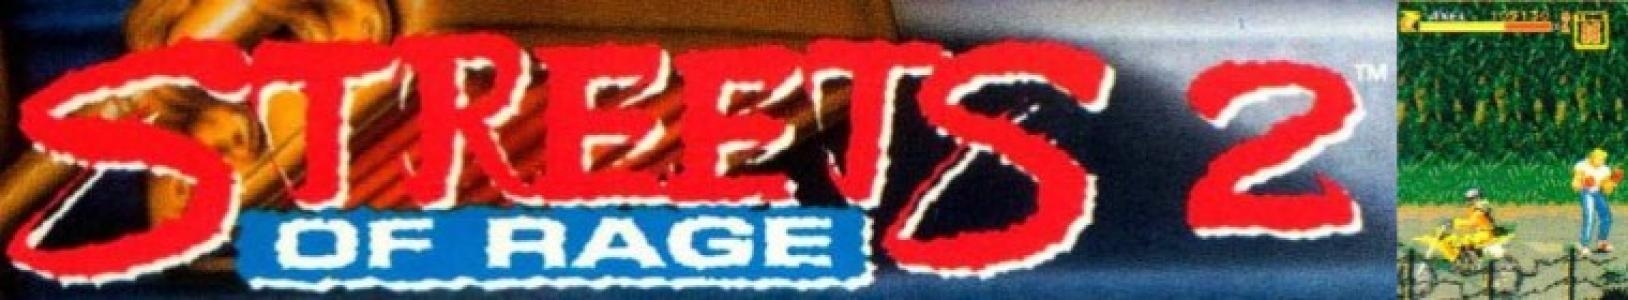 Streets of Rage 2 banner